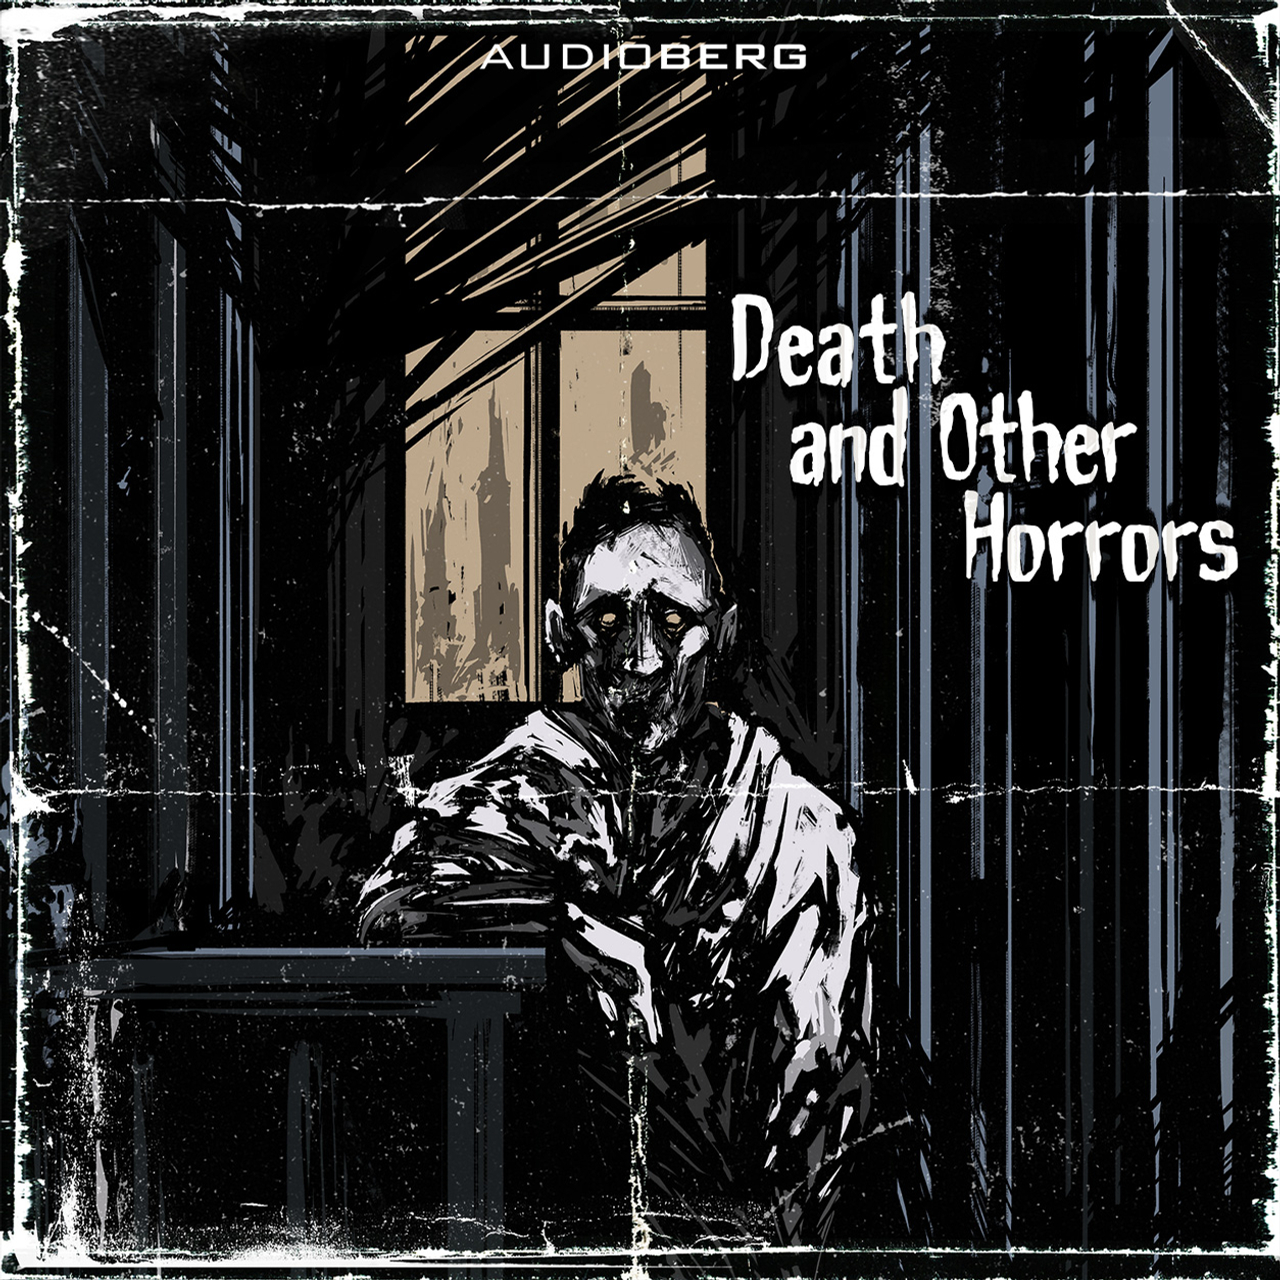 Death and other Horrors